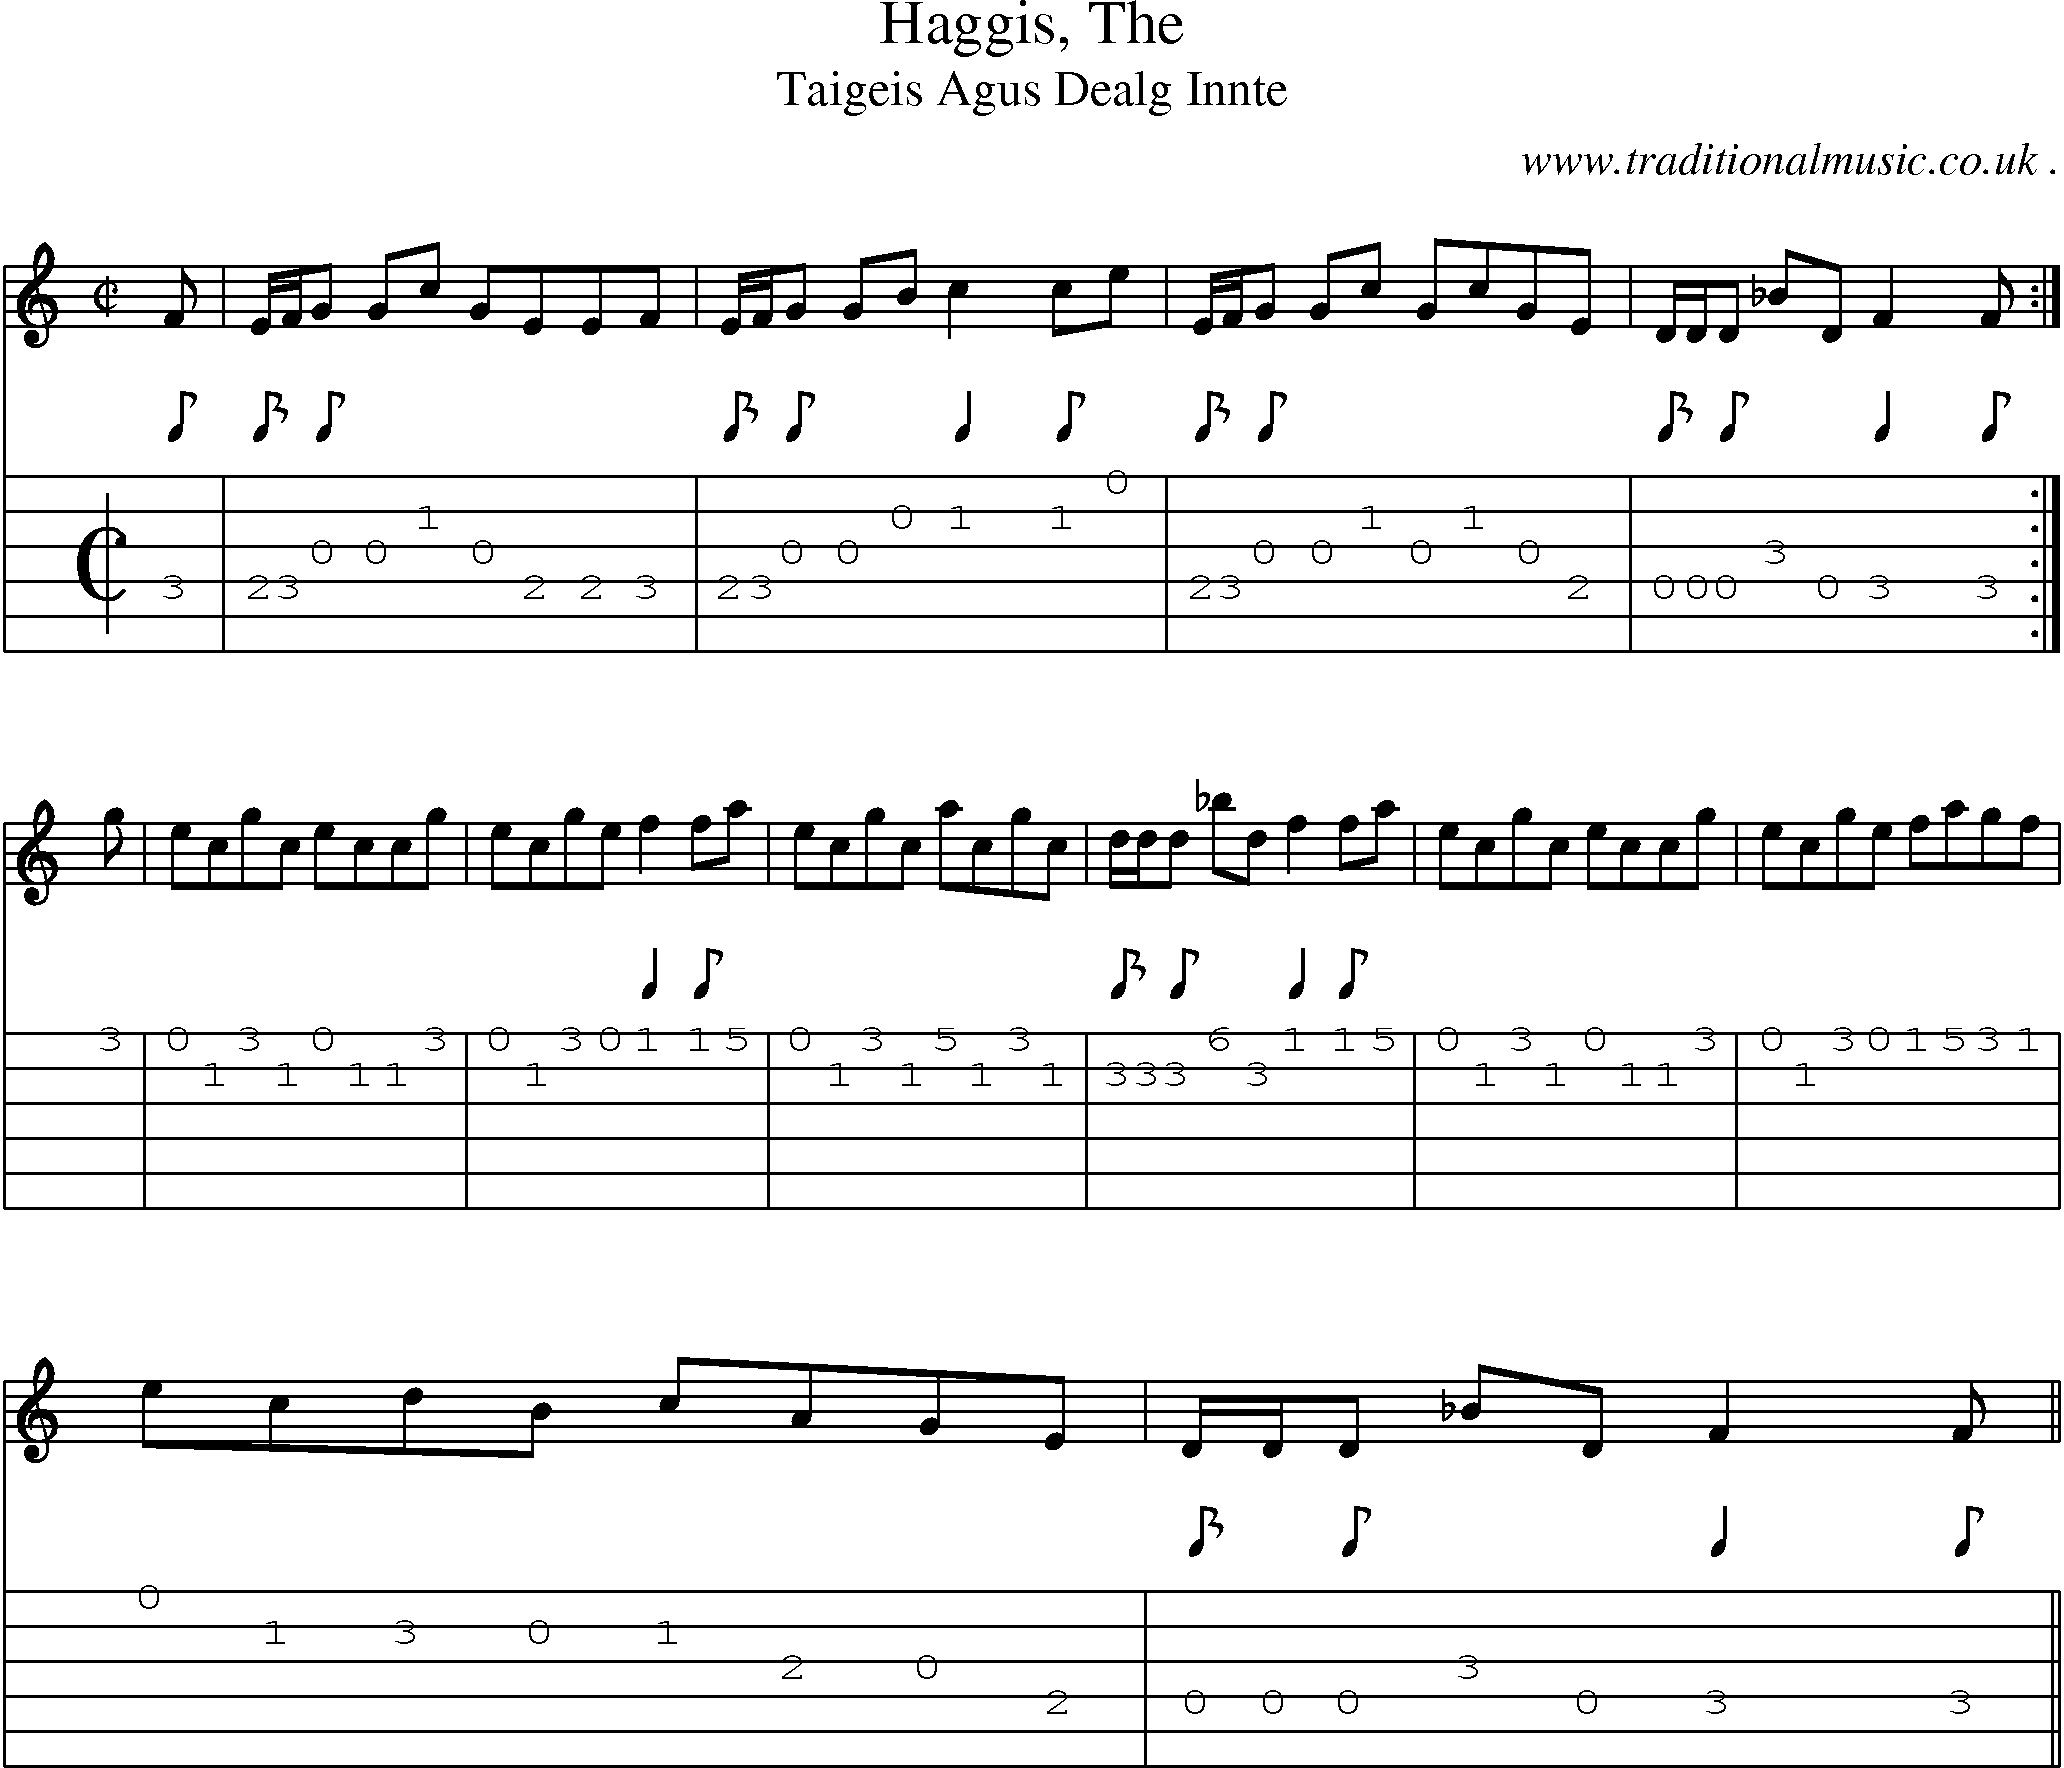 Sheet-music  score, Chords and Guitar Tabs for Haggis The